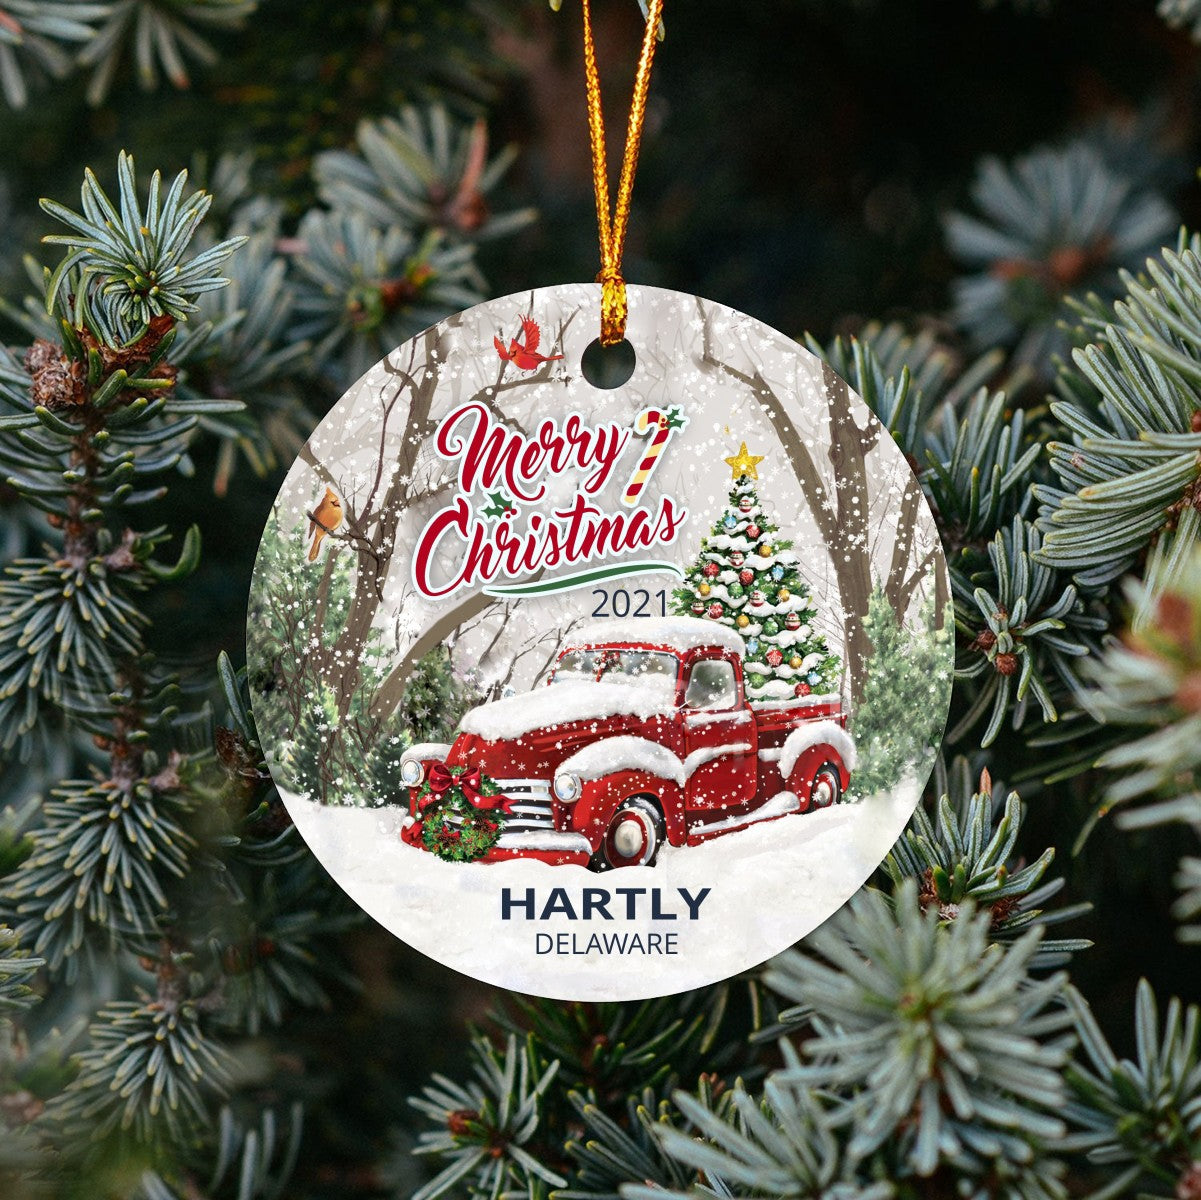 Christmas Tree Ornaments Hartly - Ornament With Name City, State Hartly Delaware DE Ornament - Red Truck Xmas Ornaments 3'' Plastic Gift For Family, Friend And Housewarming